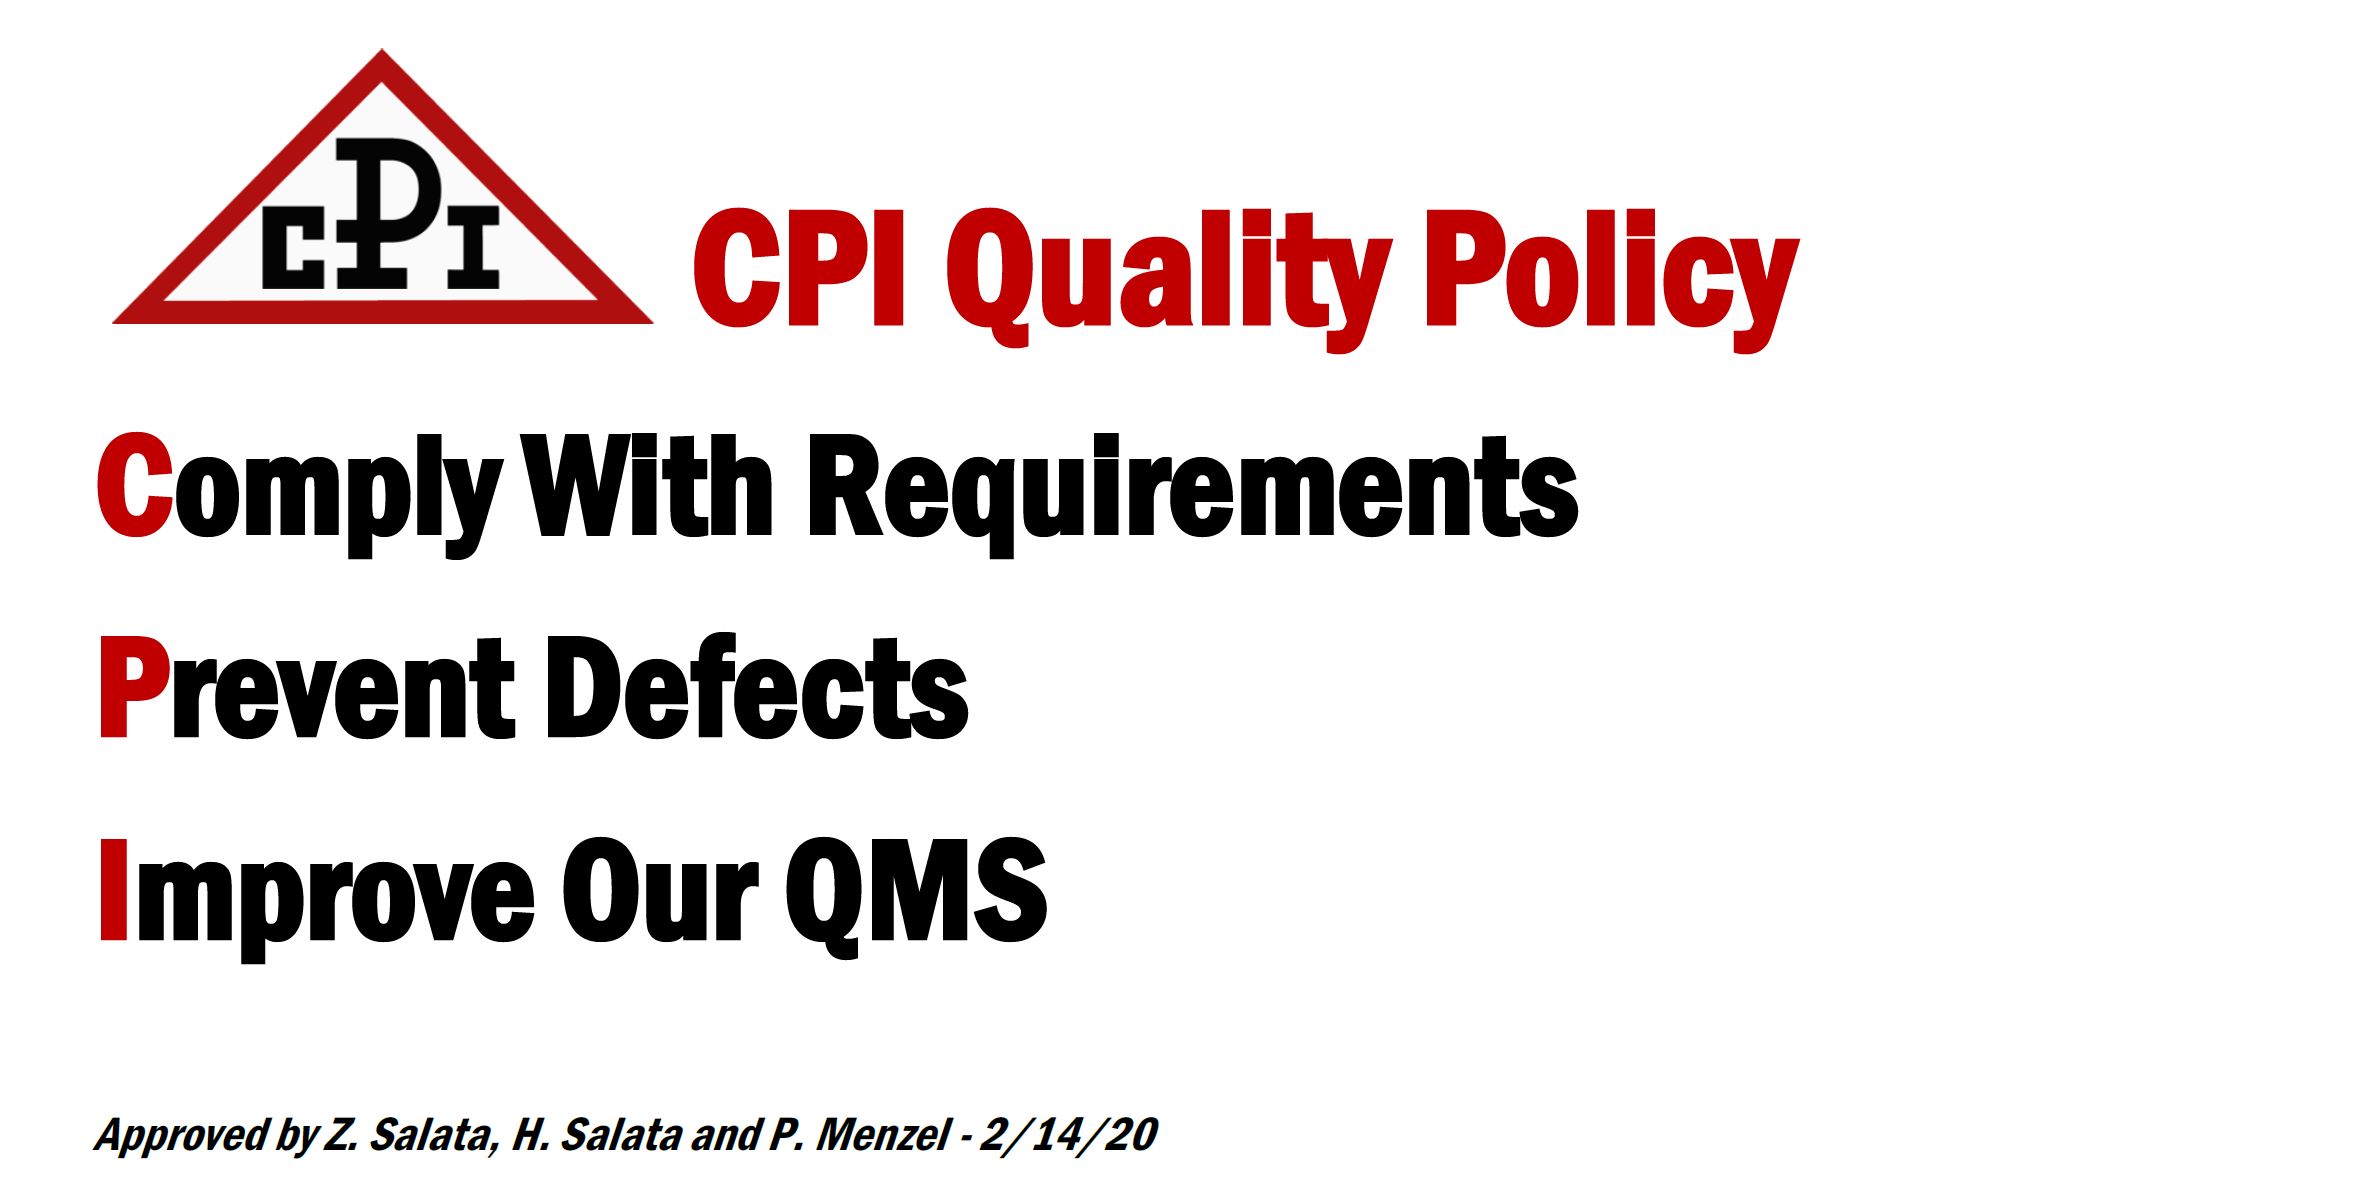 CP qualitypolicy link